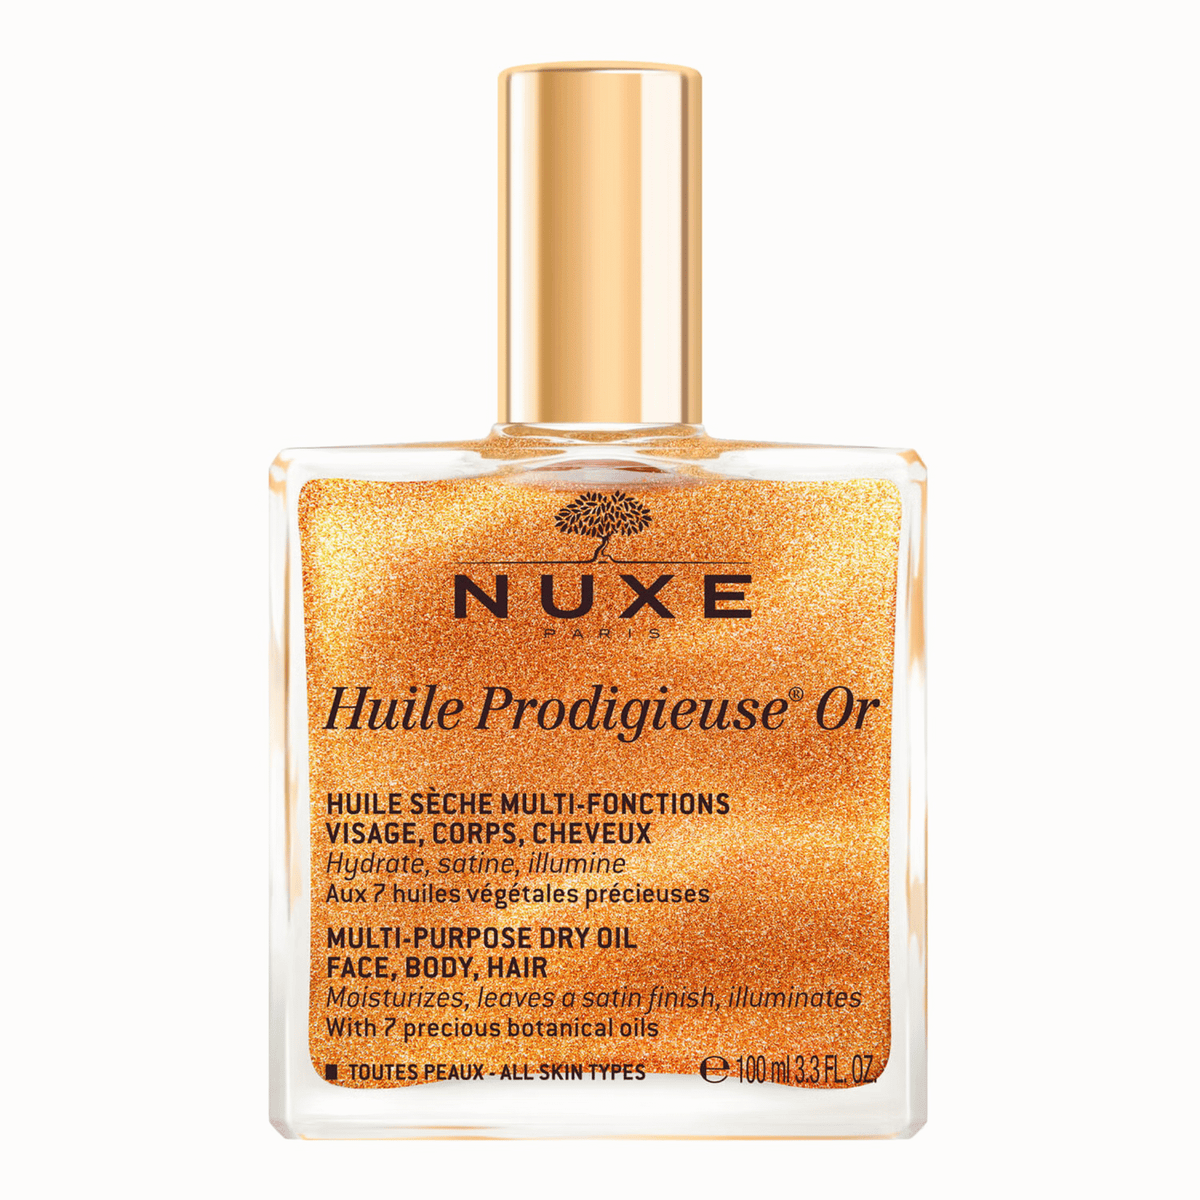 Primary Image of Huile Prodigieuse Shimmering Dry Oil 100 ml